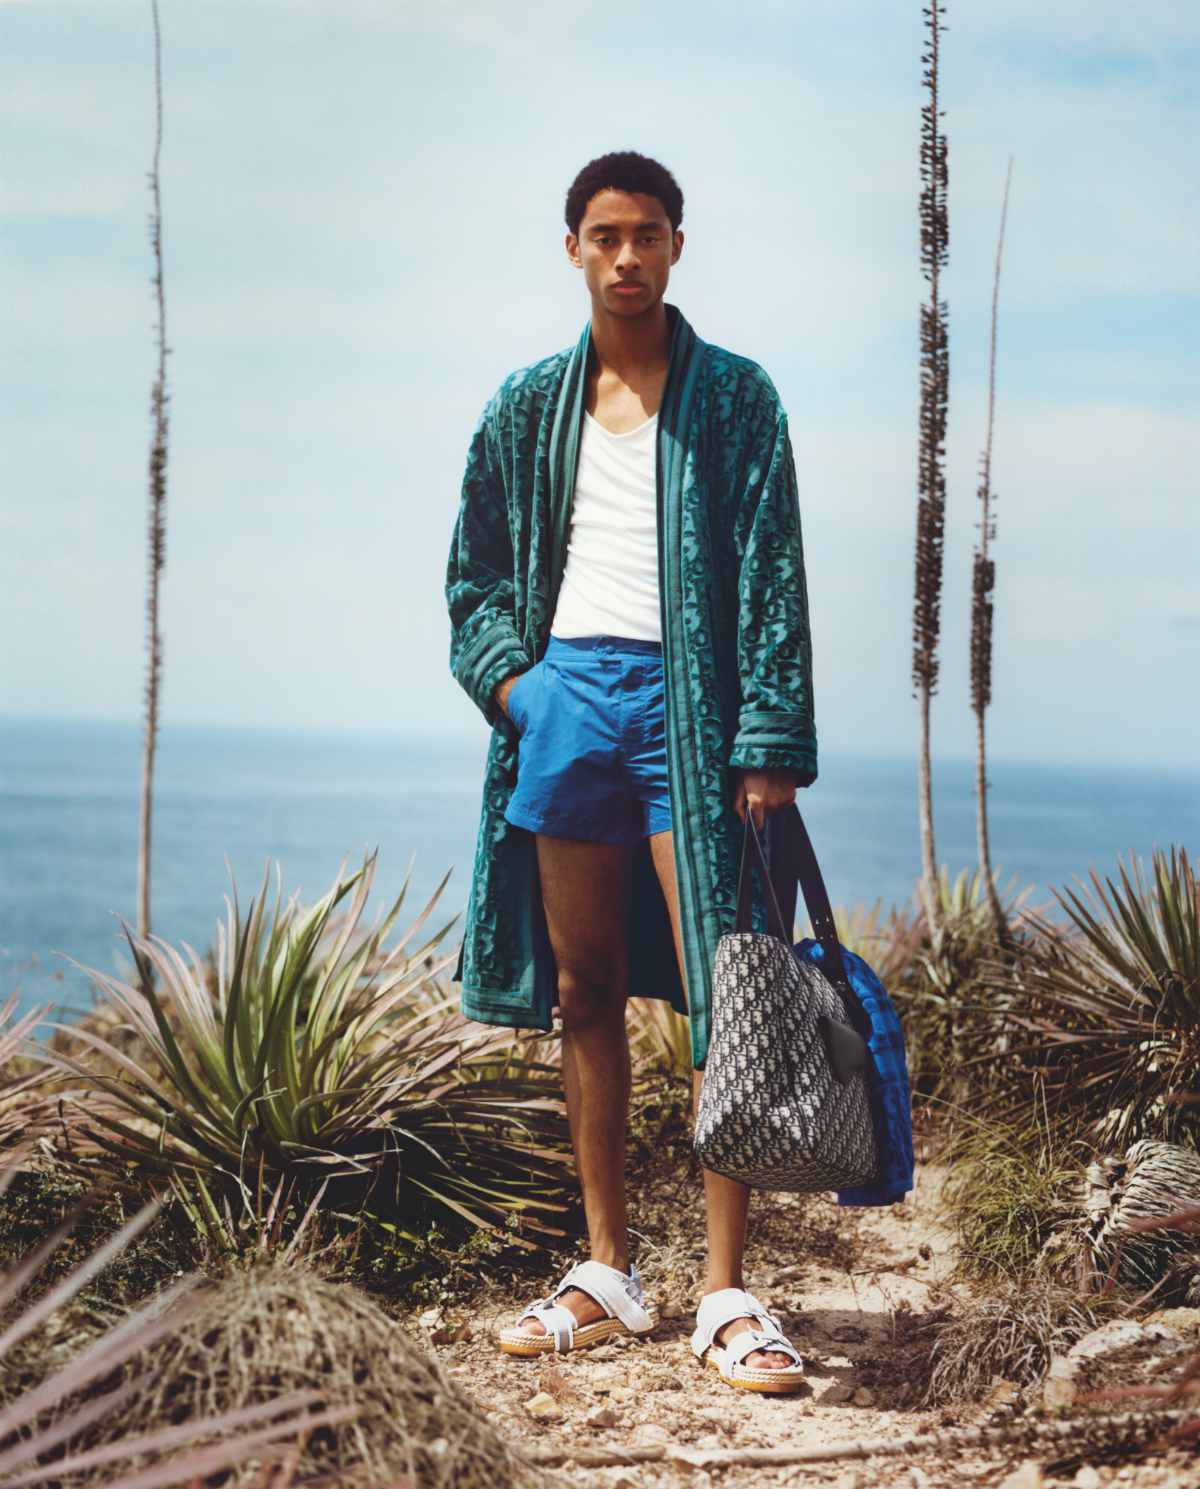 DIOR Introduces Its New Men Ready-To-Wear Beachwear 2021 Collection